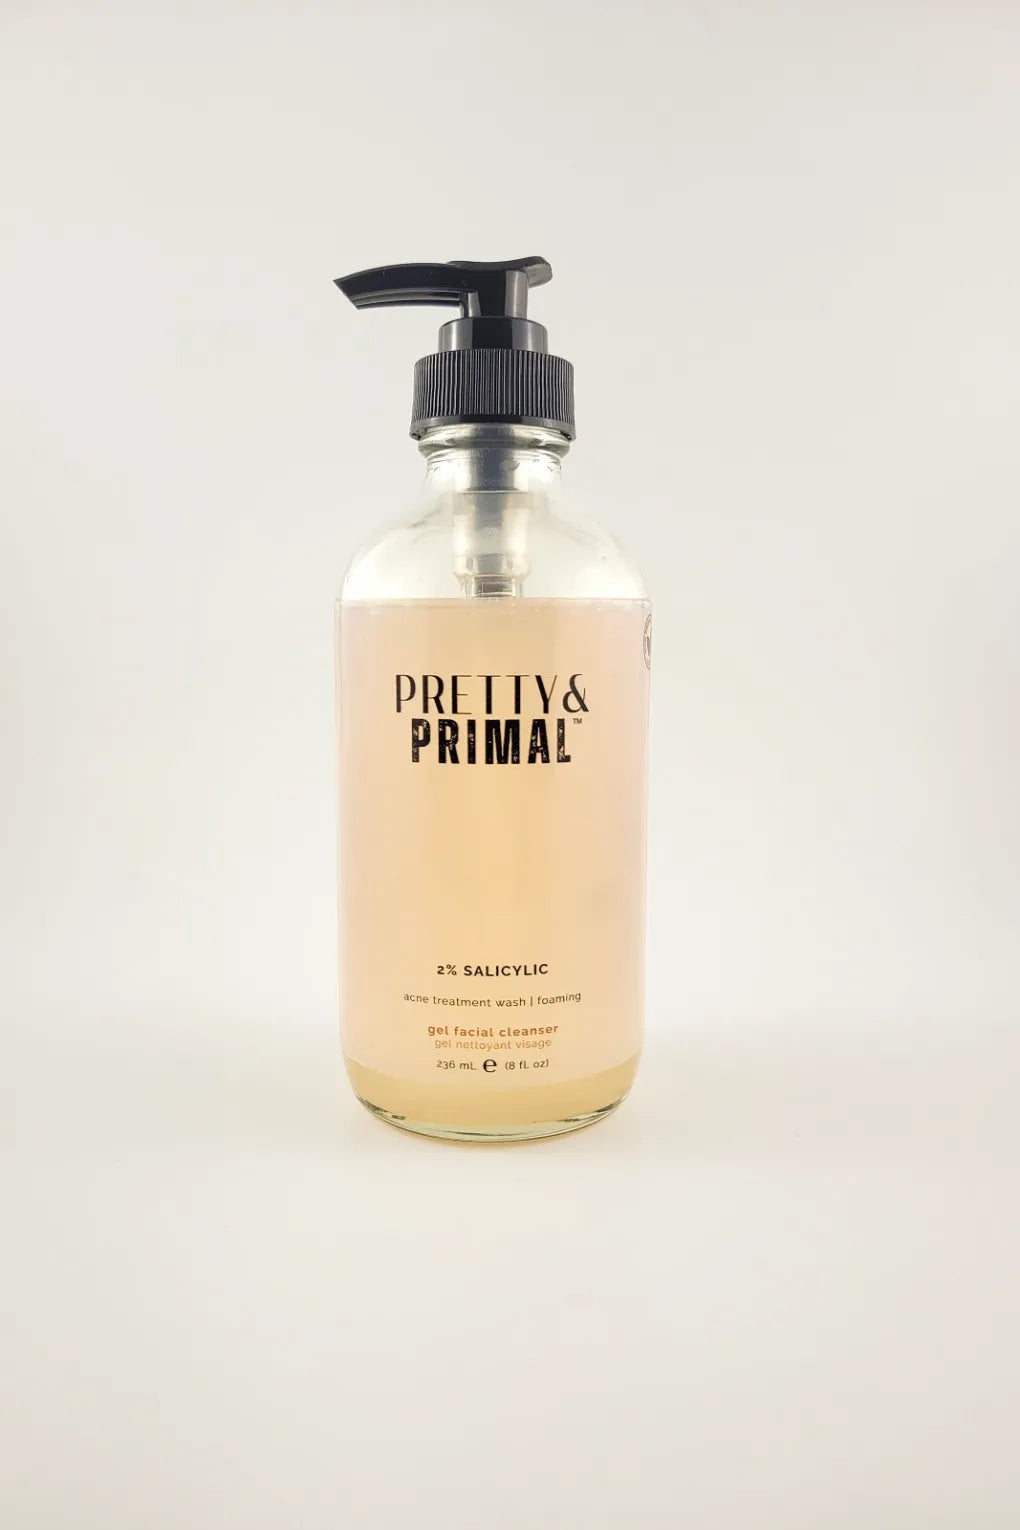 Pretty & Primal - Cleansers